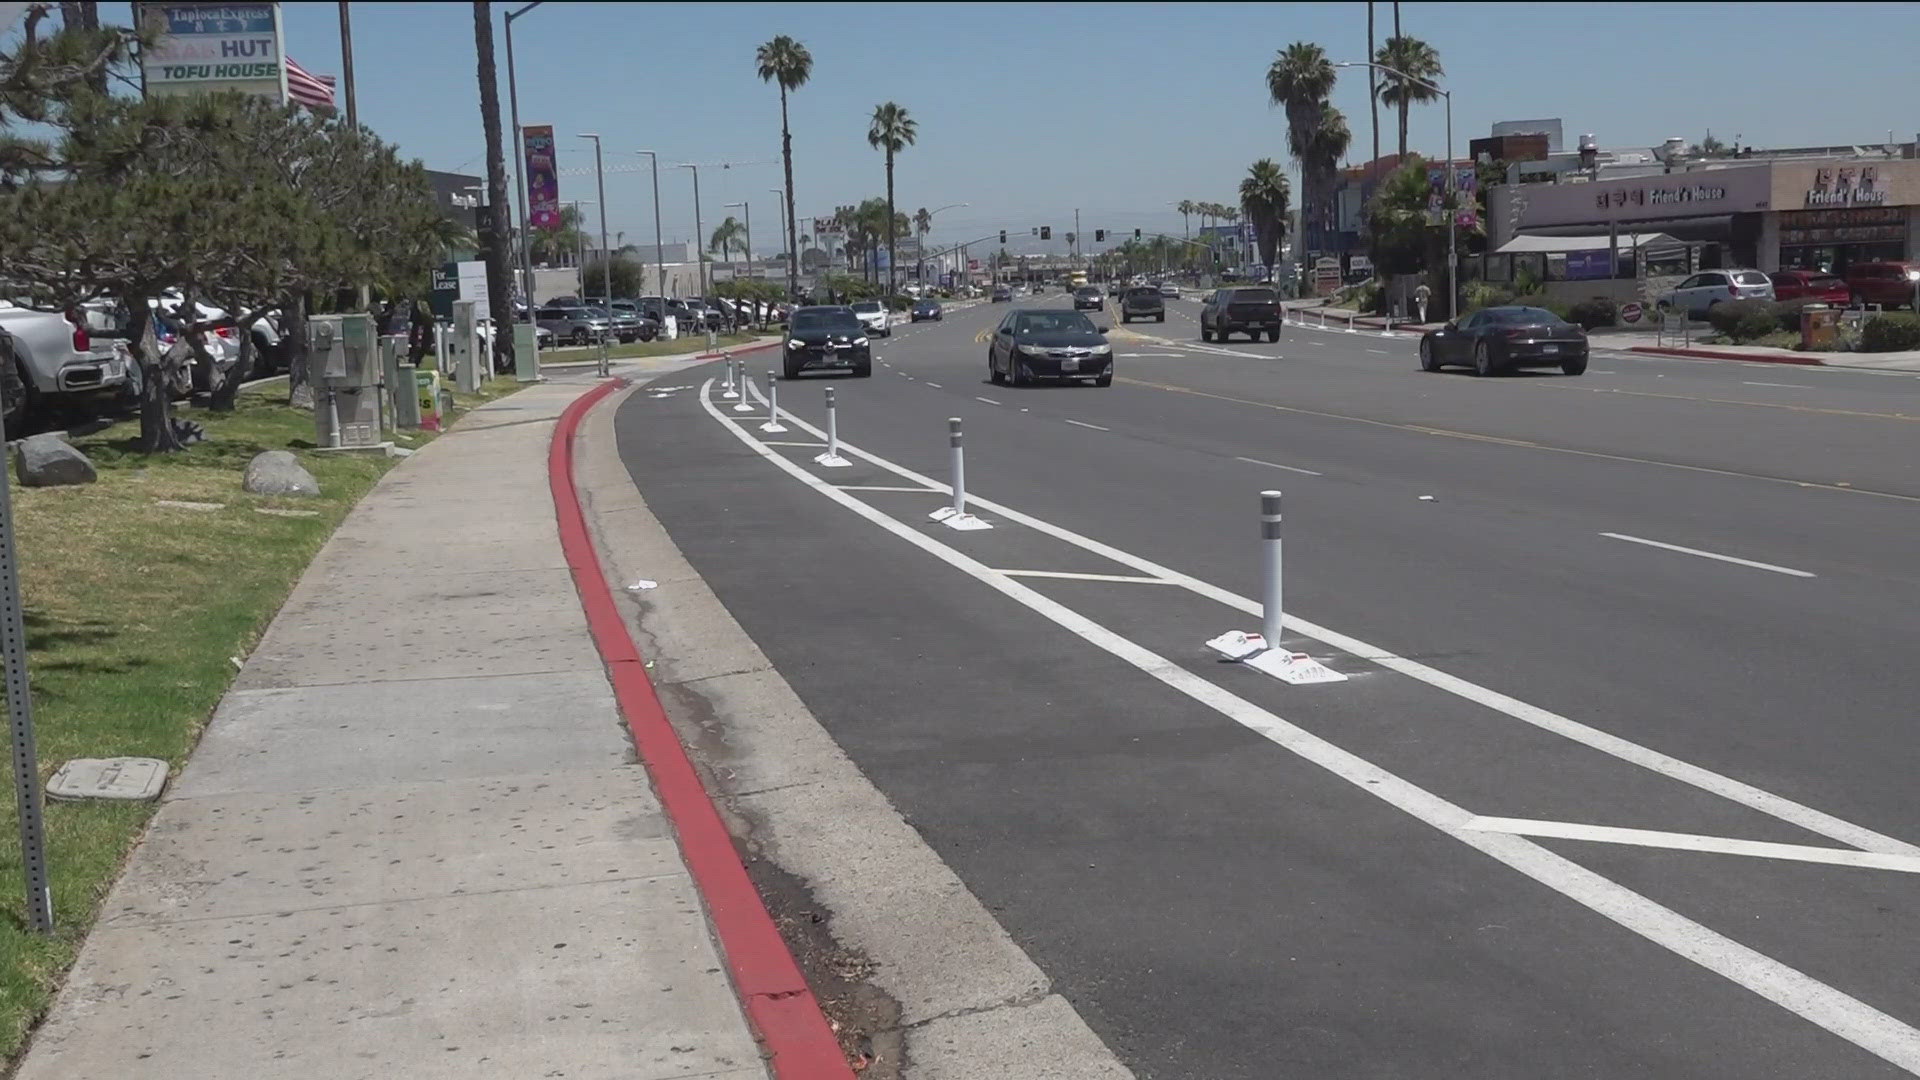 The new lanes take what used to be available street parking. The City of San Diego is working with the Convoy District to create a plan to improve parking.